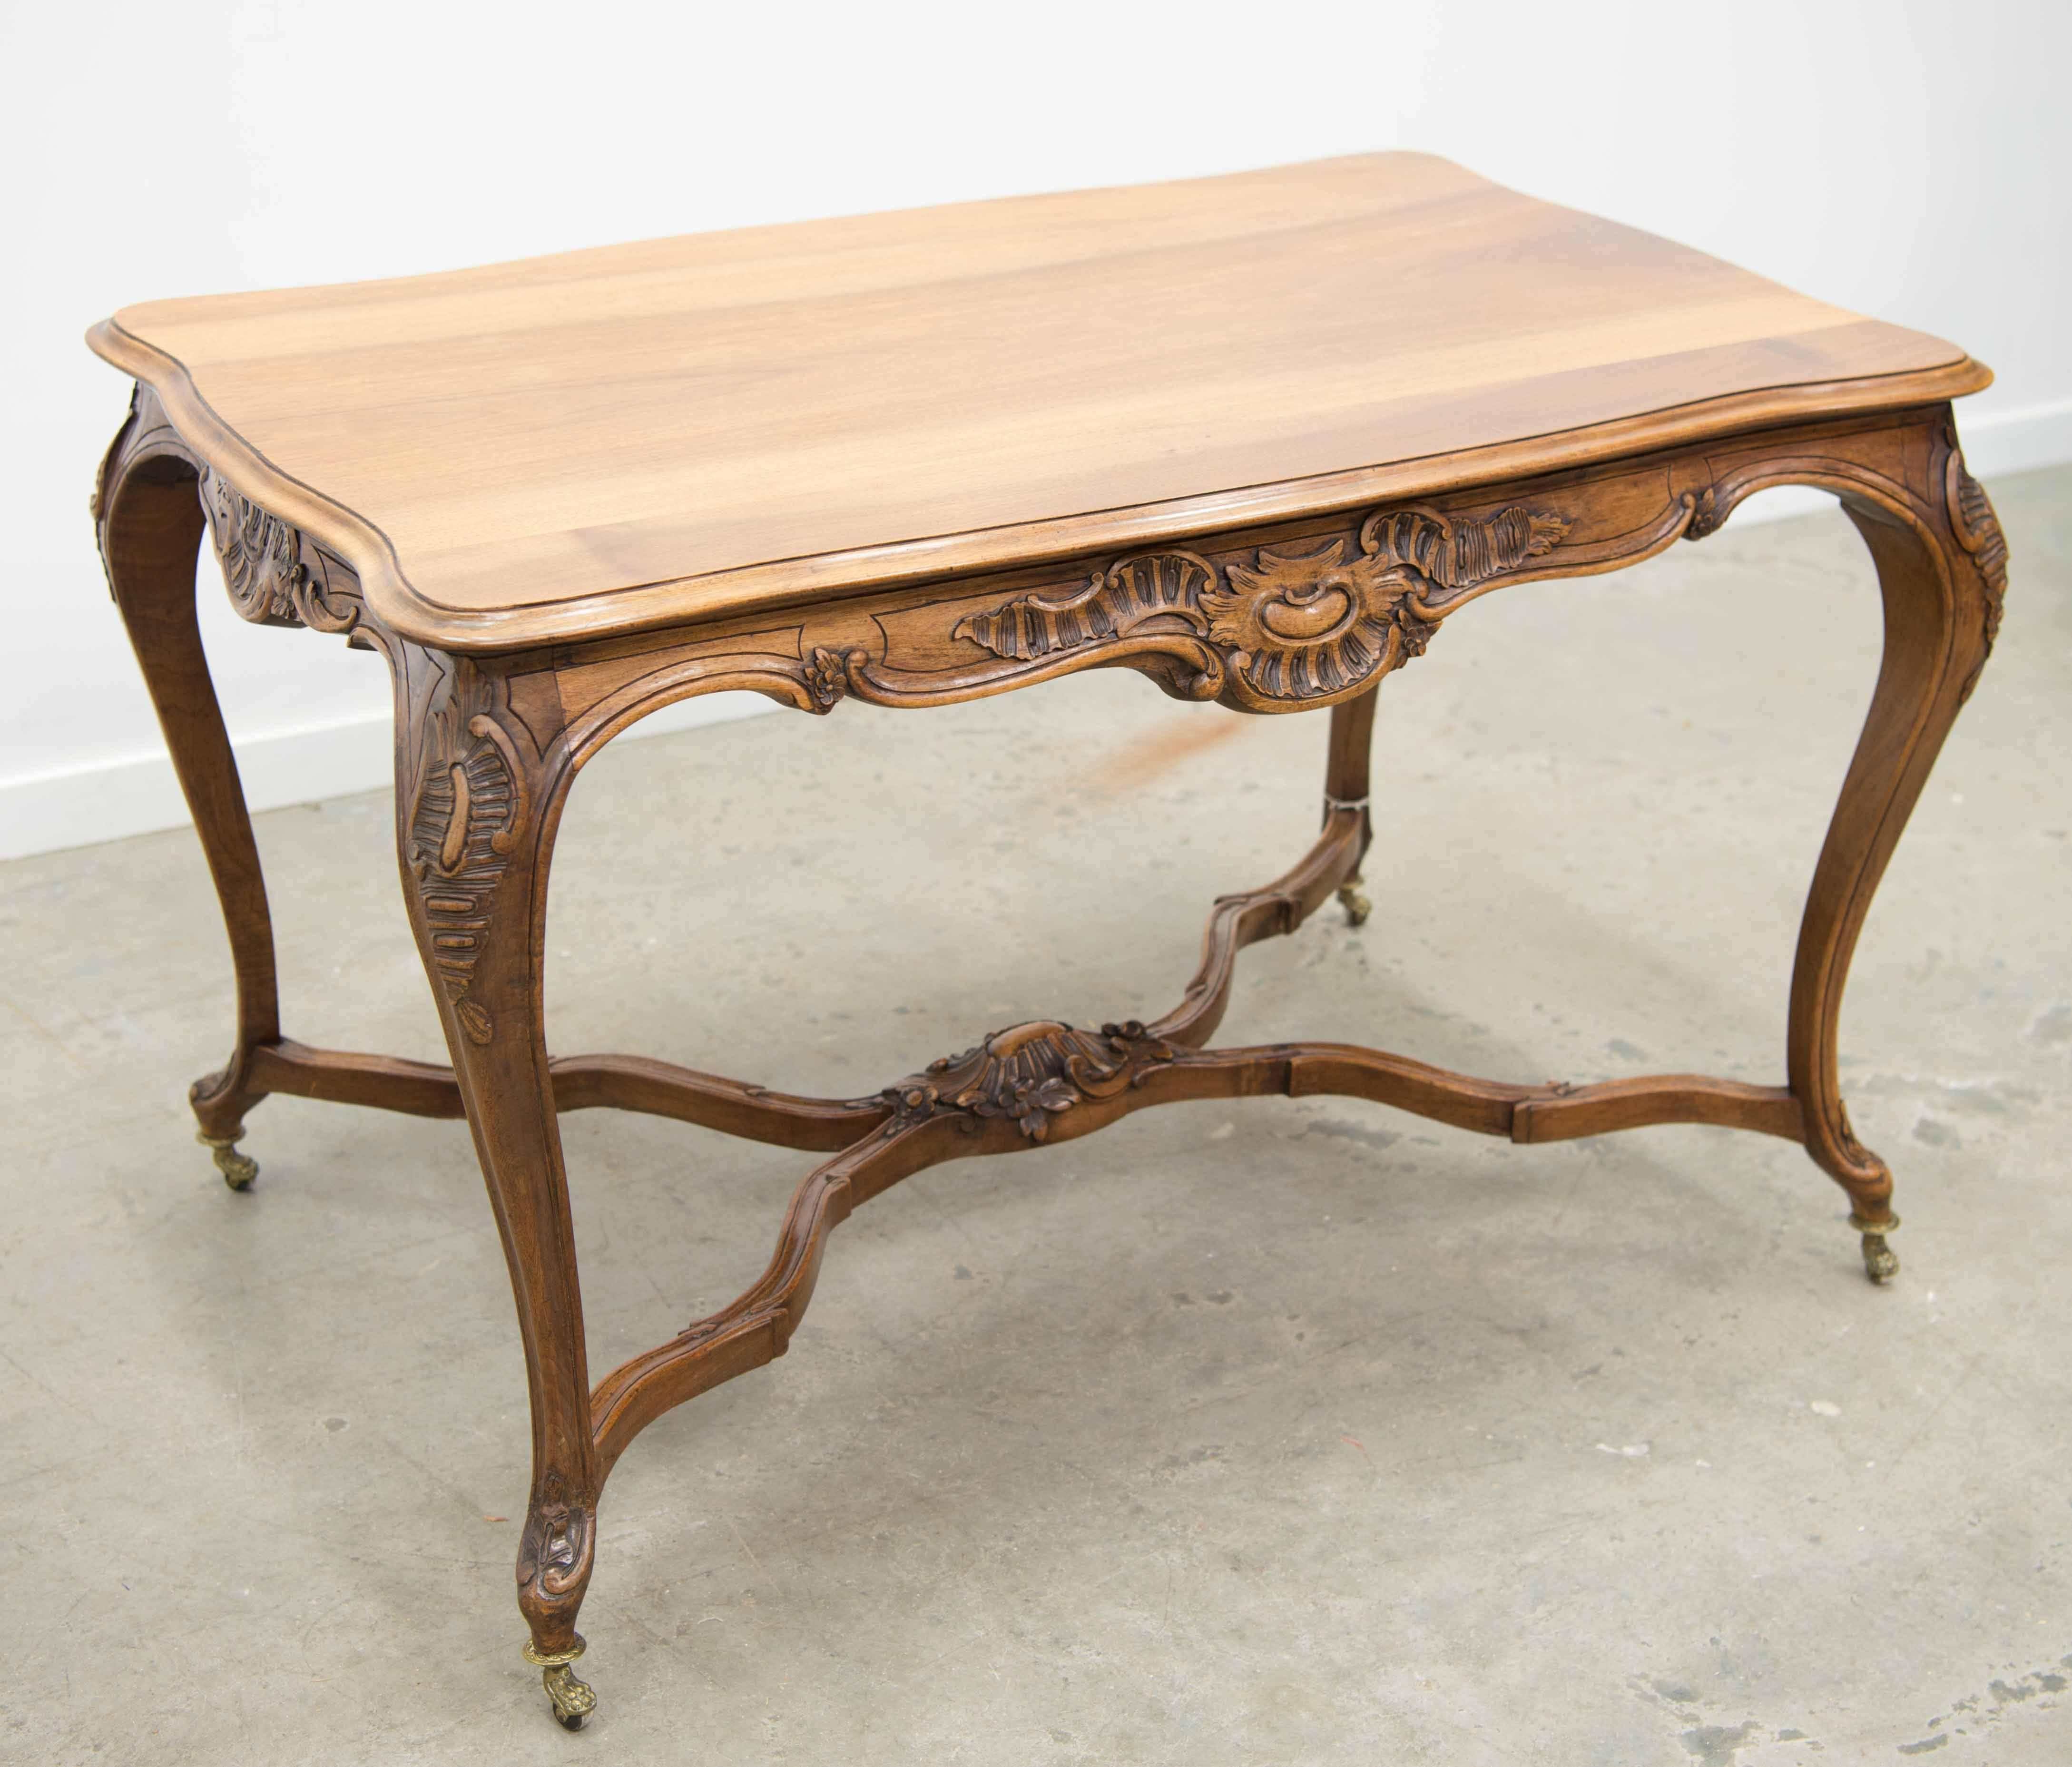 Large Louis XV style playing table on bronze feet with wheels.
The table has a warm hue and was most likely made circa 1920.
The table was most likely used as a side table or playing or game table, due to the size. 

Please note: This item is